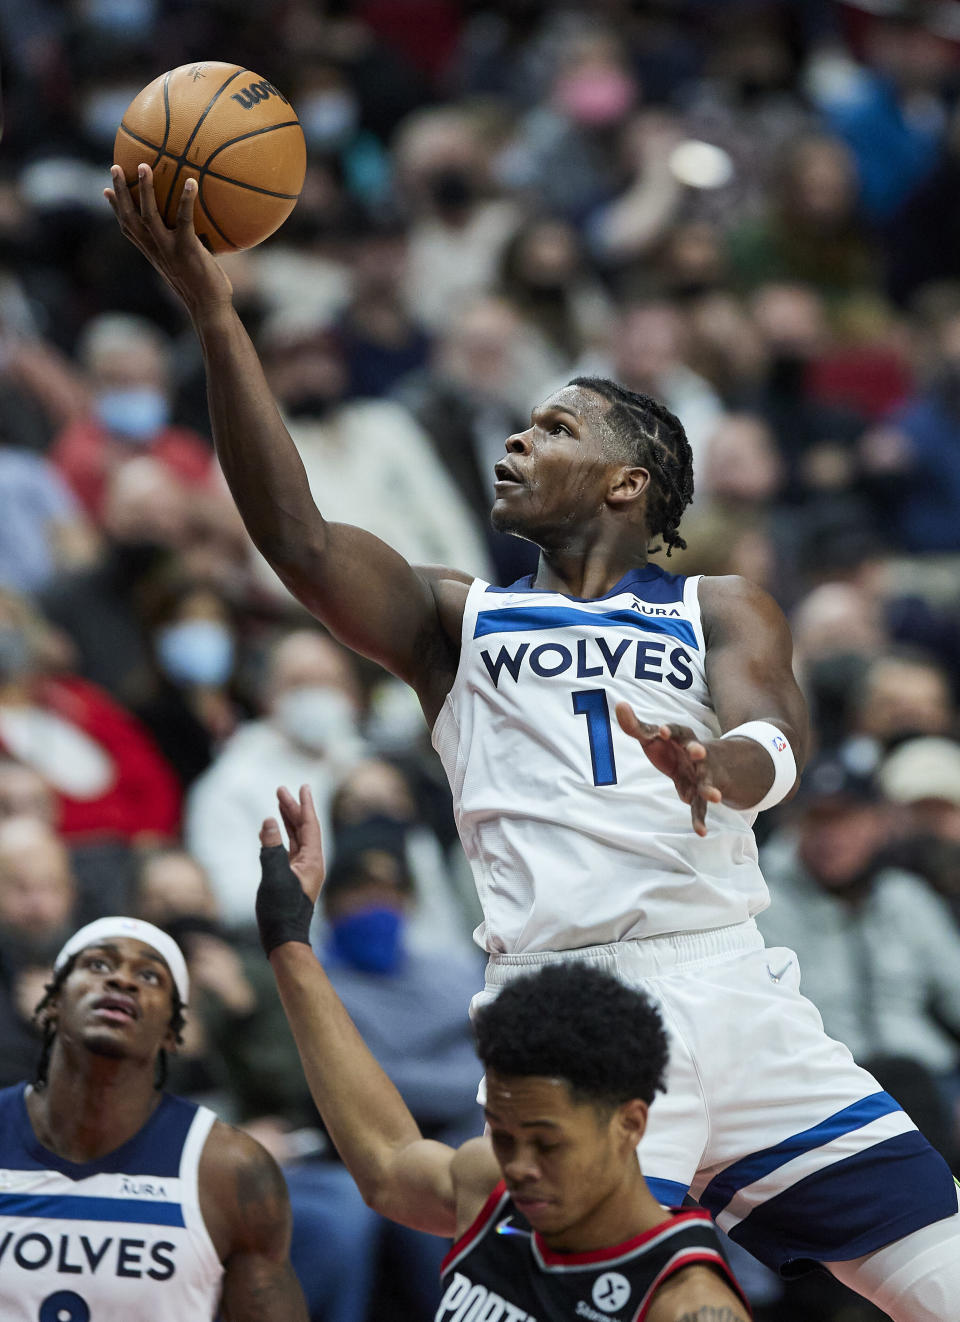 Minnesota Timberwolves forward Anthony Edwards shoots over Portland Trail Blazers guard Anfernee Simons during the first half of an NBA basketball game in Portland, Ore., Tuesday, Jan. 25, 2022. (AP Photo/Craig Mitchelldyer)